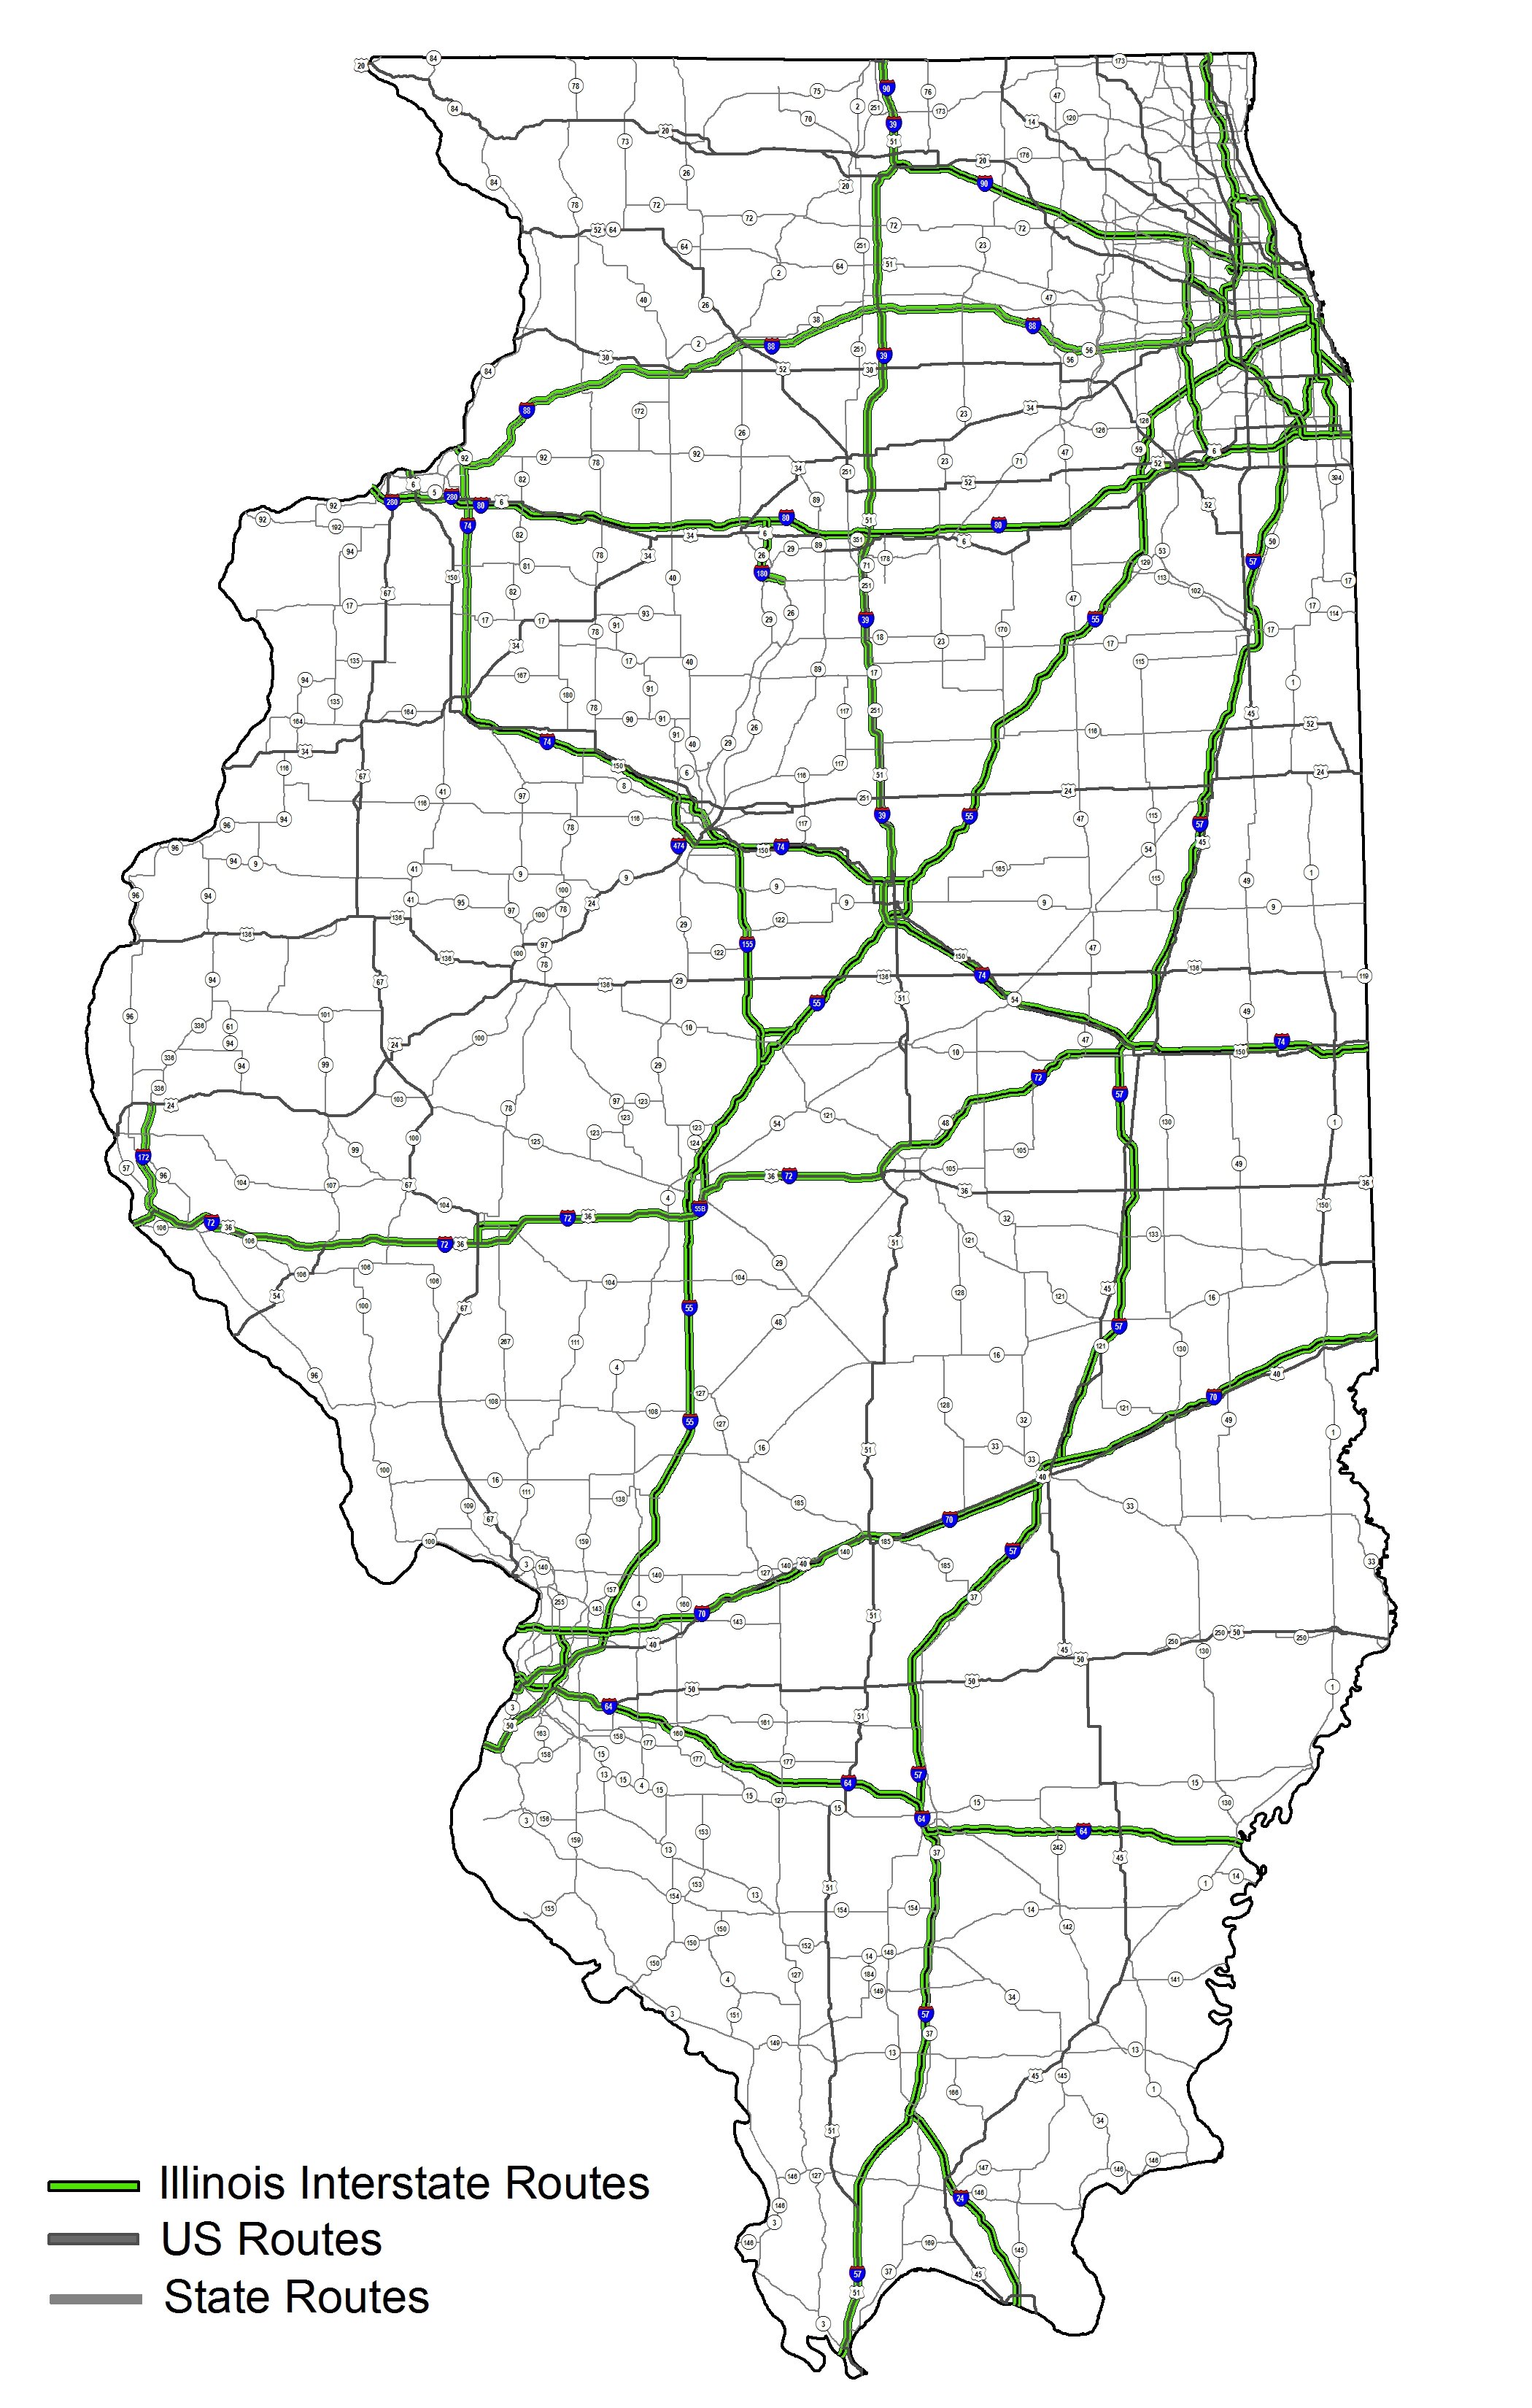 Highway System Map